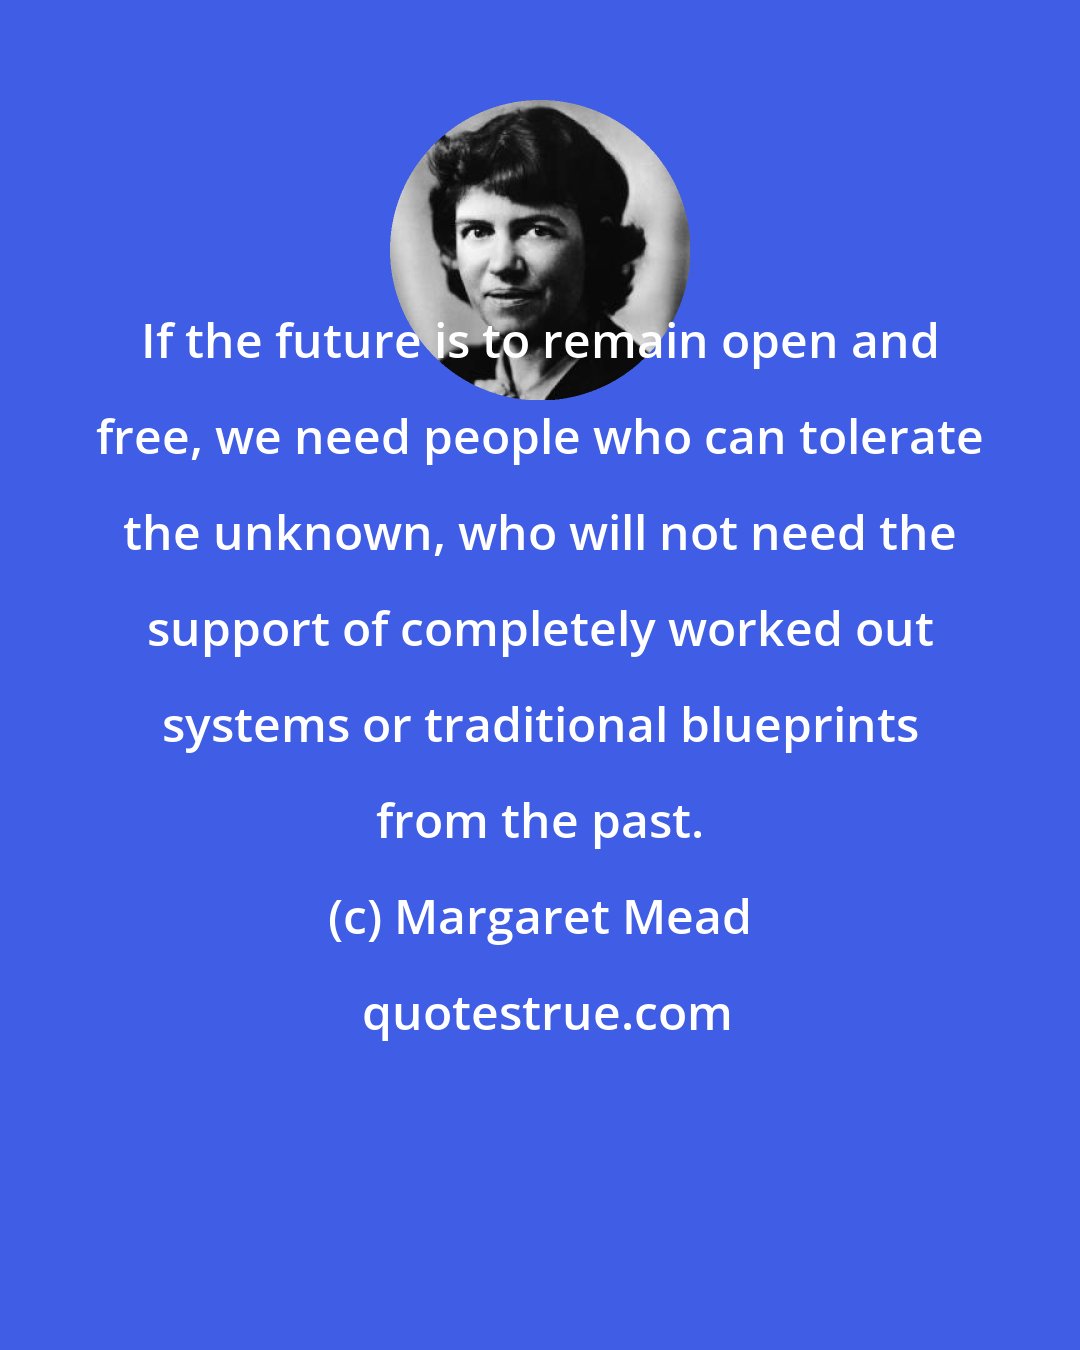 Margaret Mead: If the future is to remain open and free, we need people who can tolerate the unknown, who will not need the support of completely worked out systems or traditional blueprints from the past.